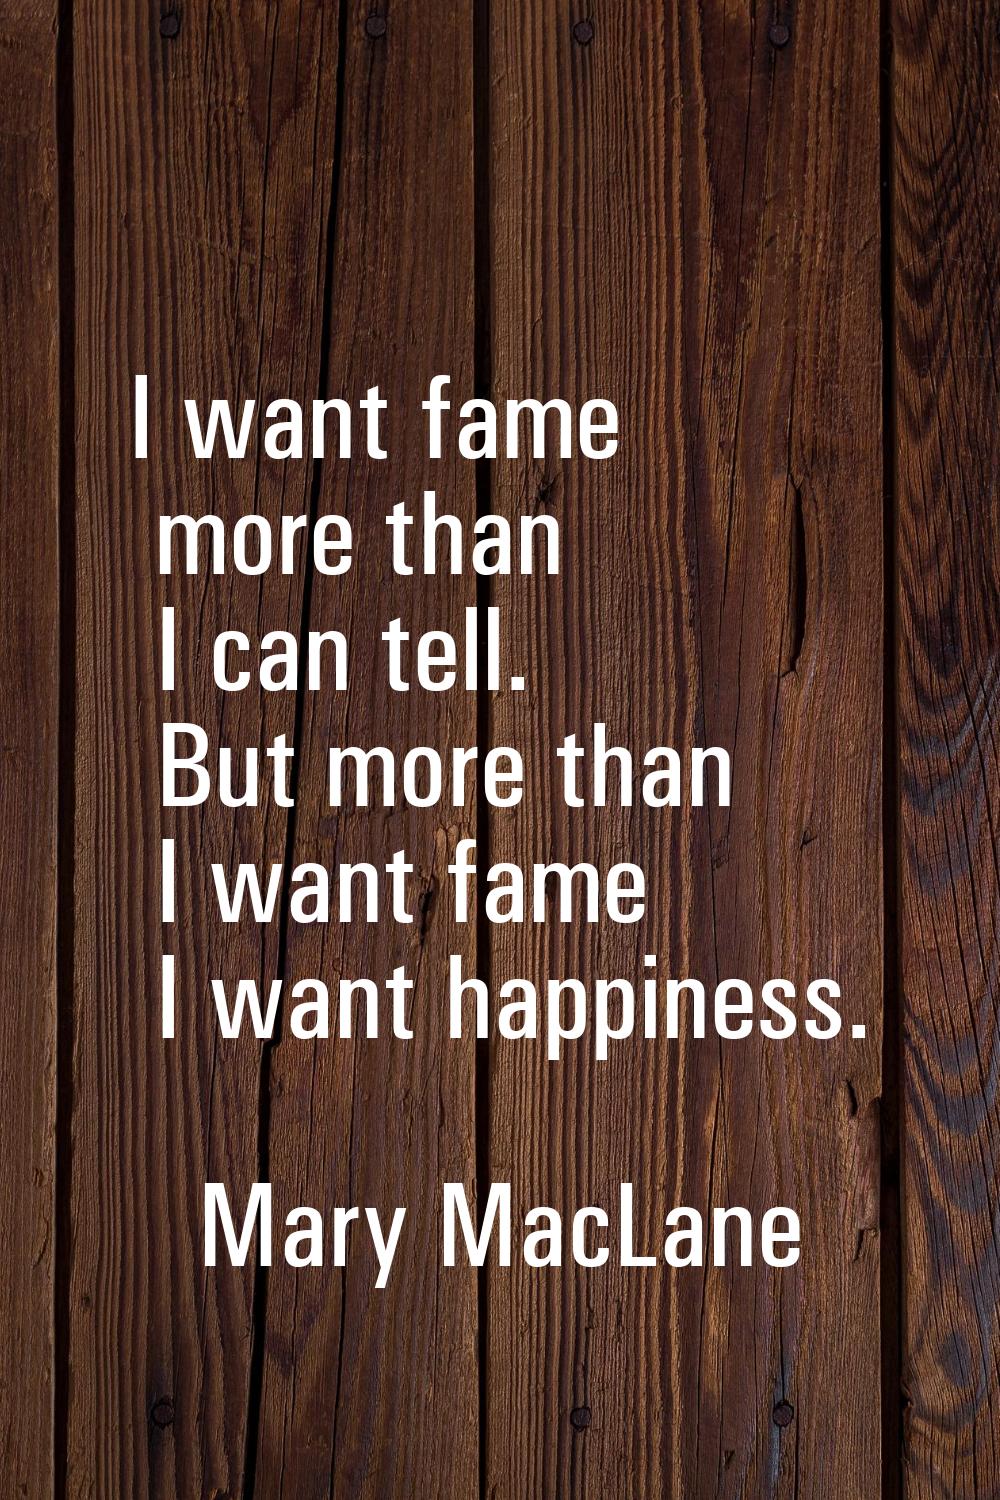 I want fame more than I can tell. But more than I want fame I want happiness.